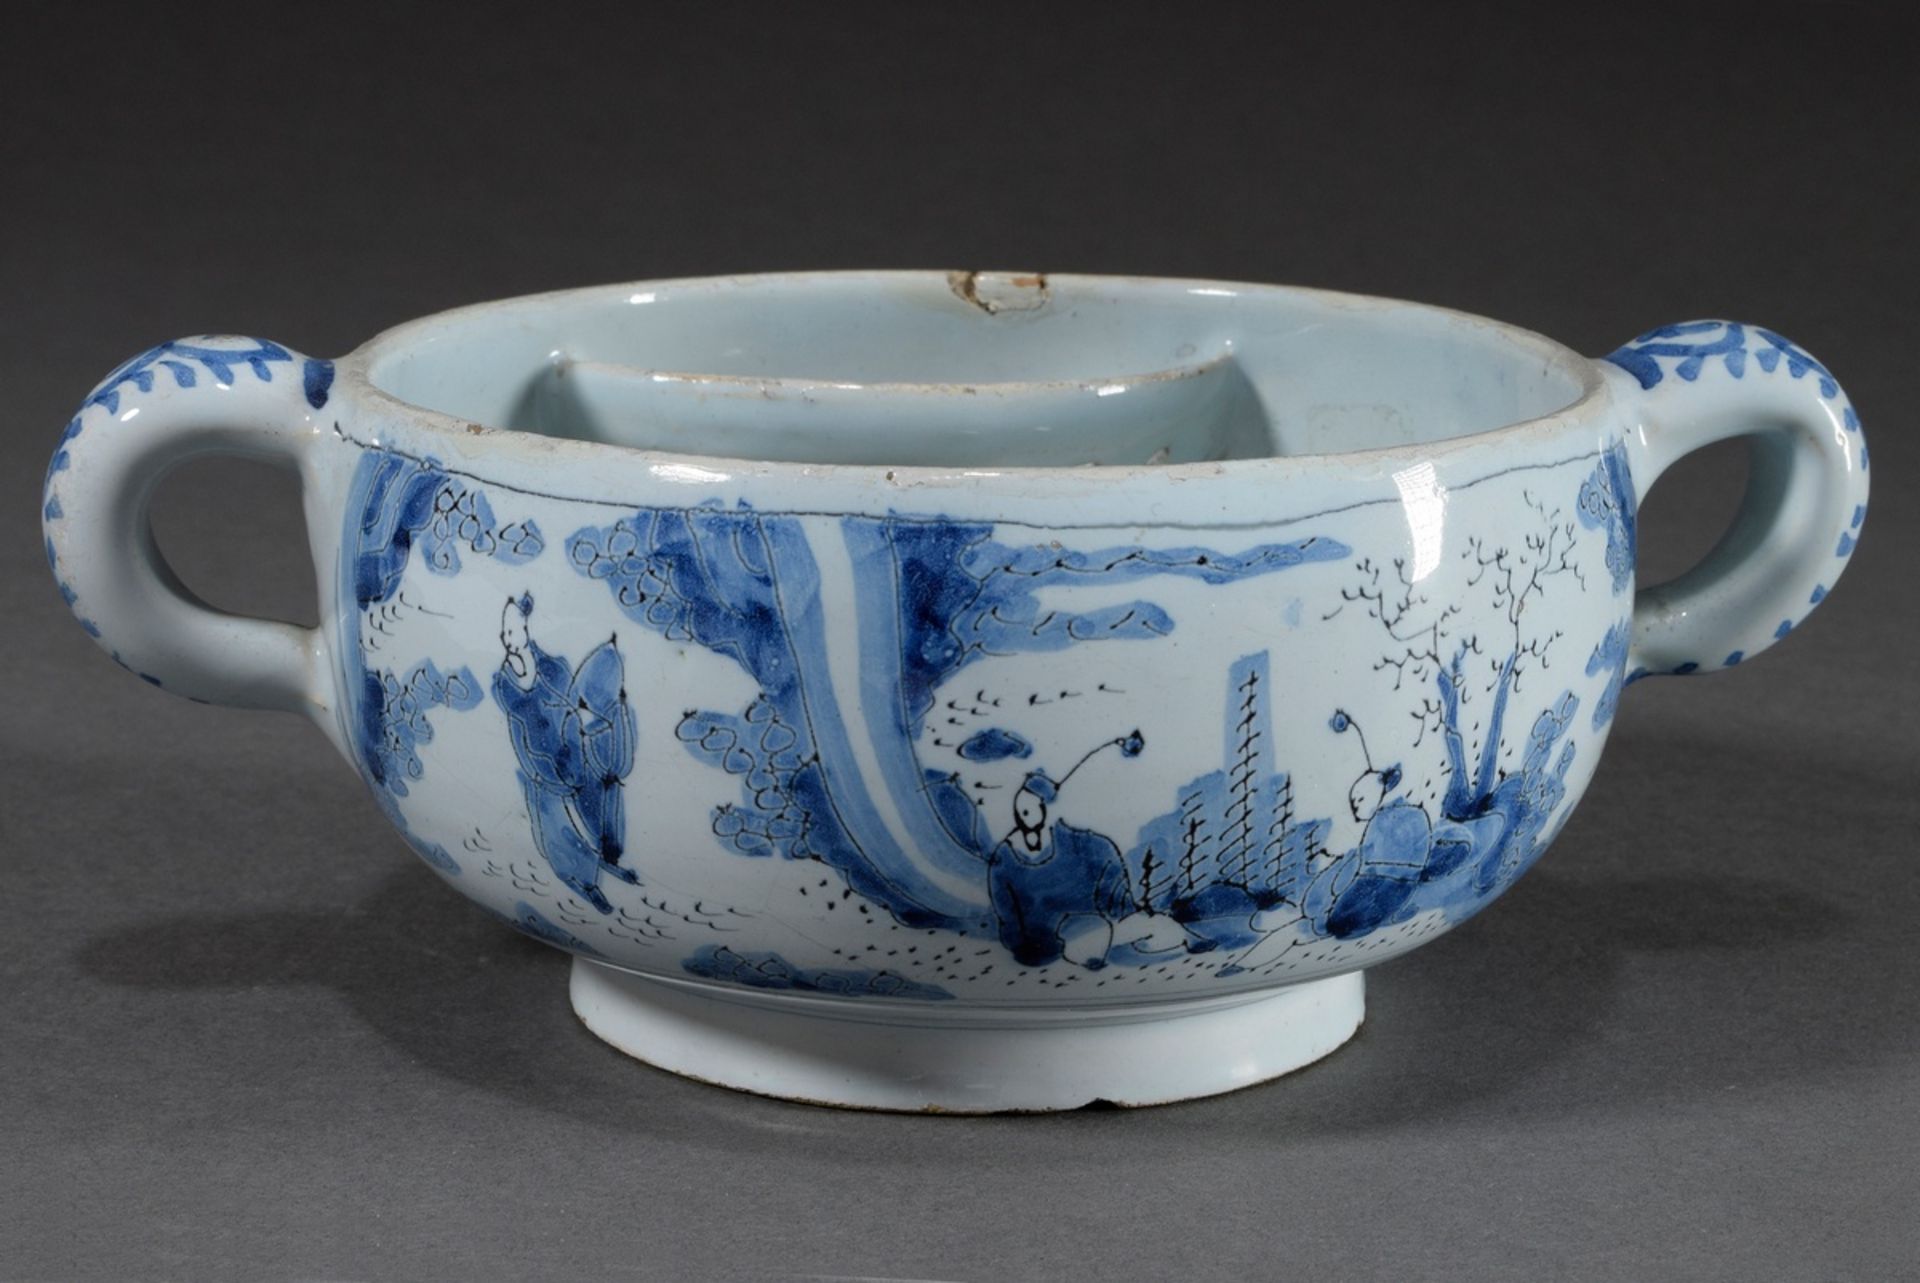 Faience shaving bowl with strainer insert for brush/soap and side handles, fine blue painting decor